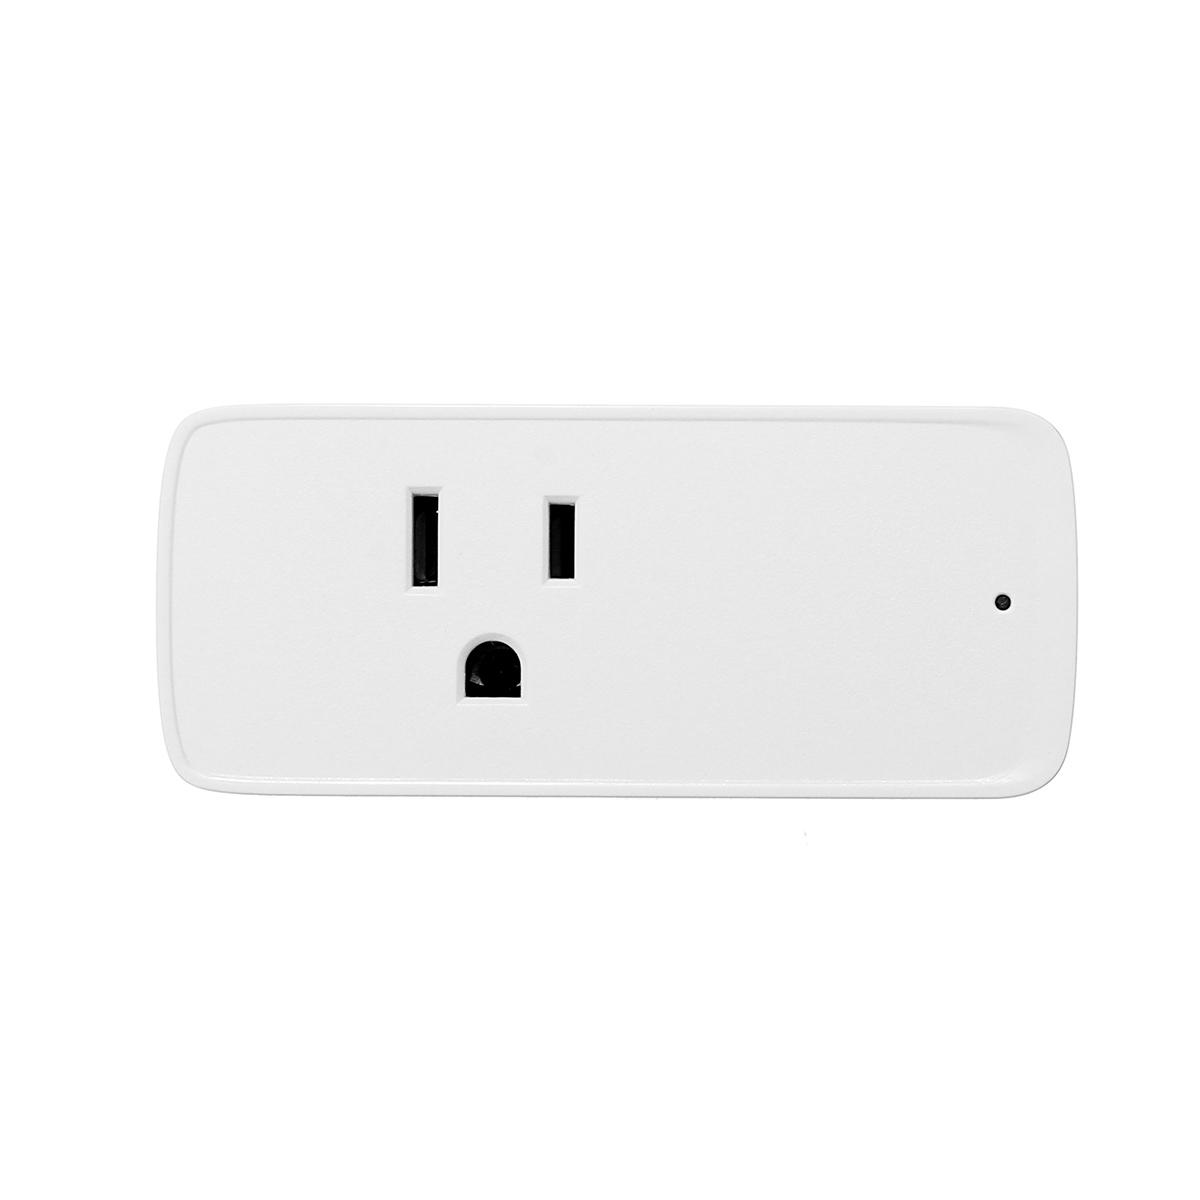 AC-100-240V-Mini-Smart-WiFi-Socket-Switch-App-Remote-Control-Timing-Function-Voice-Control-with-USB-1348366-3